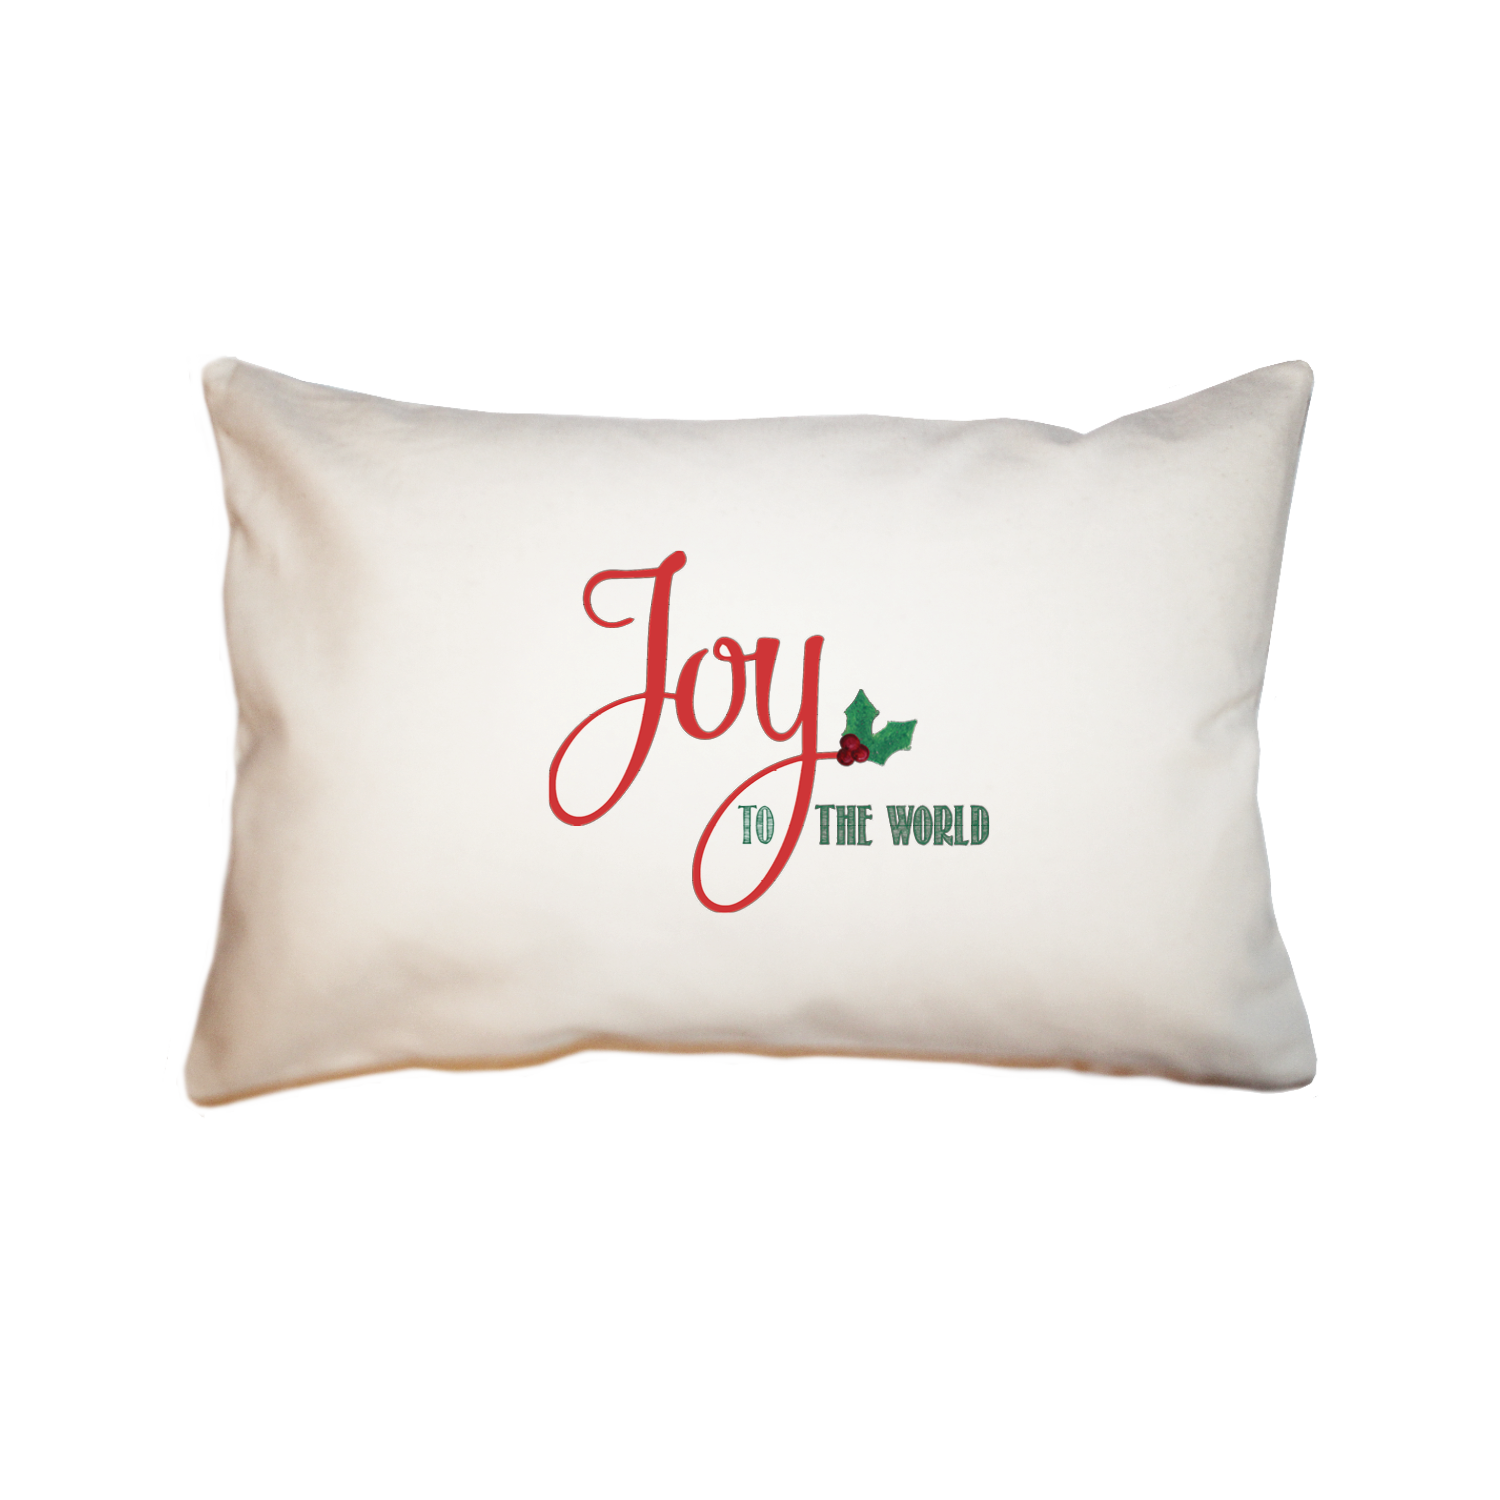 joy to the world large rectangle pillow